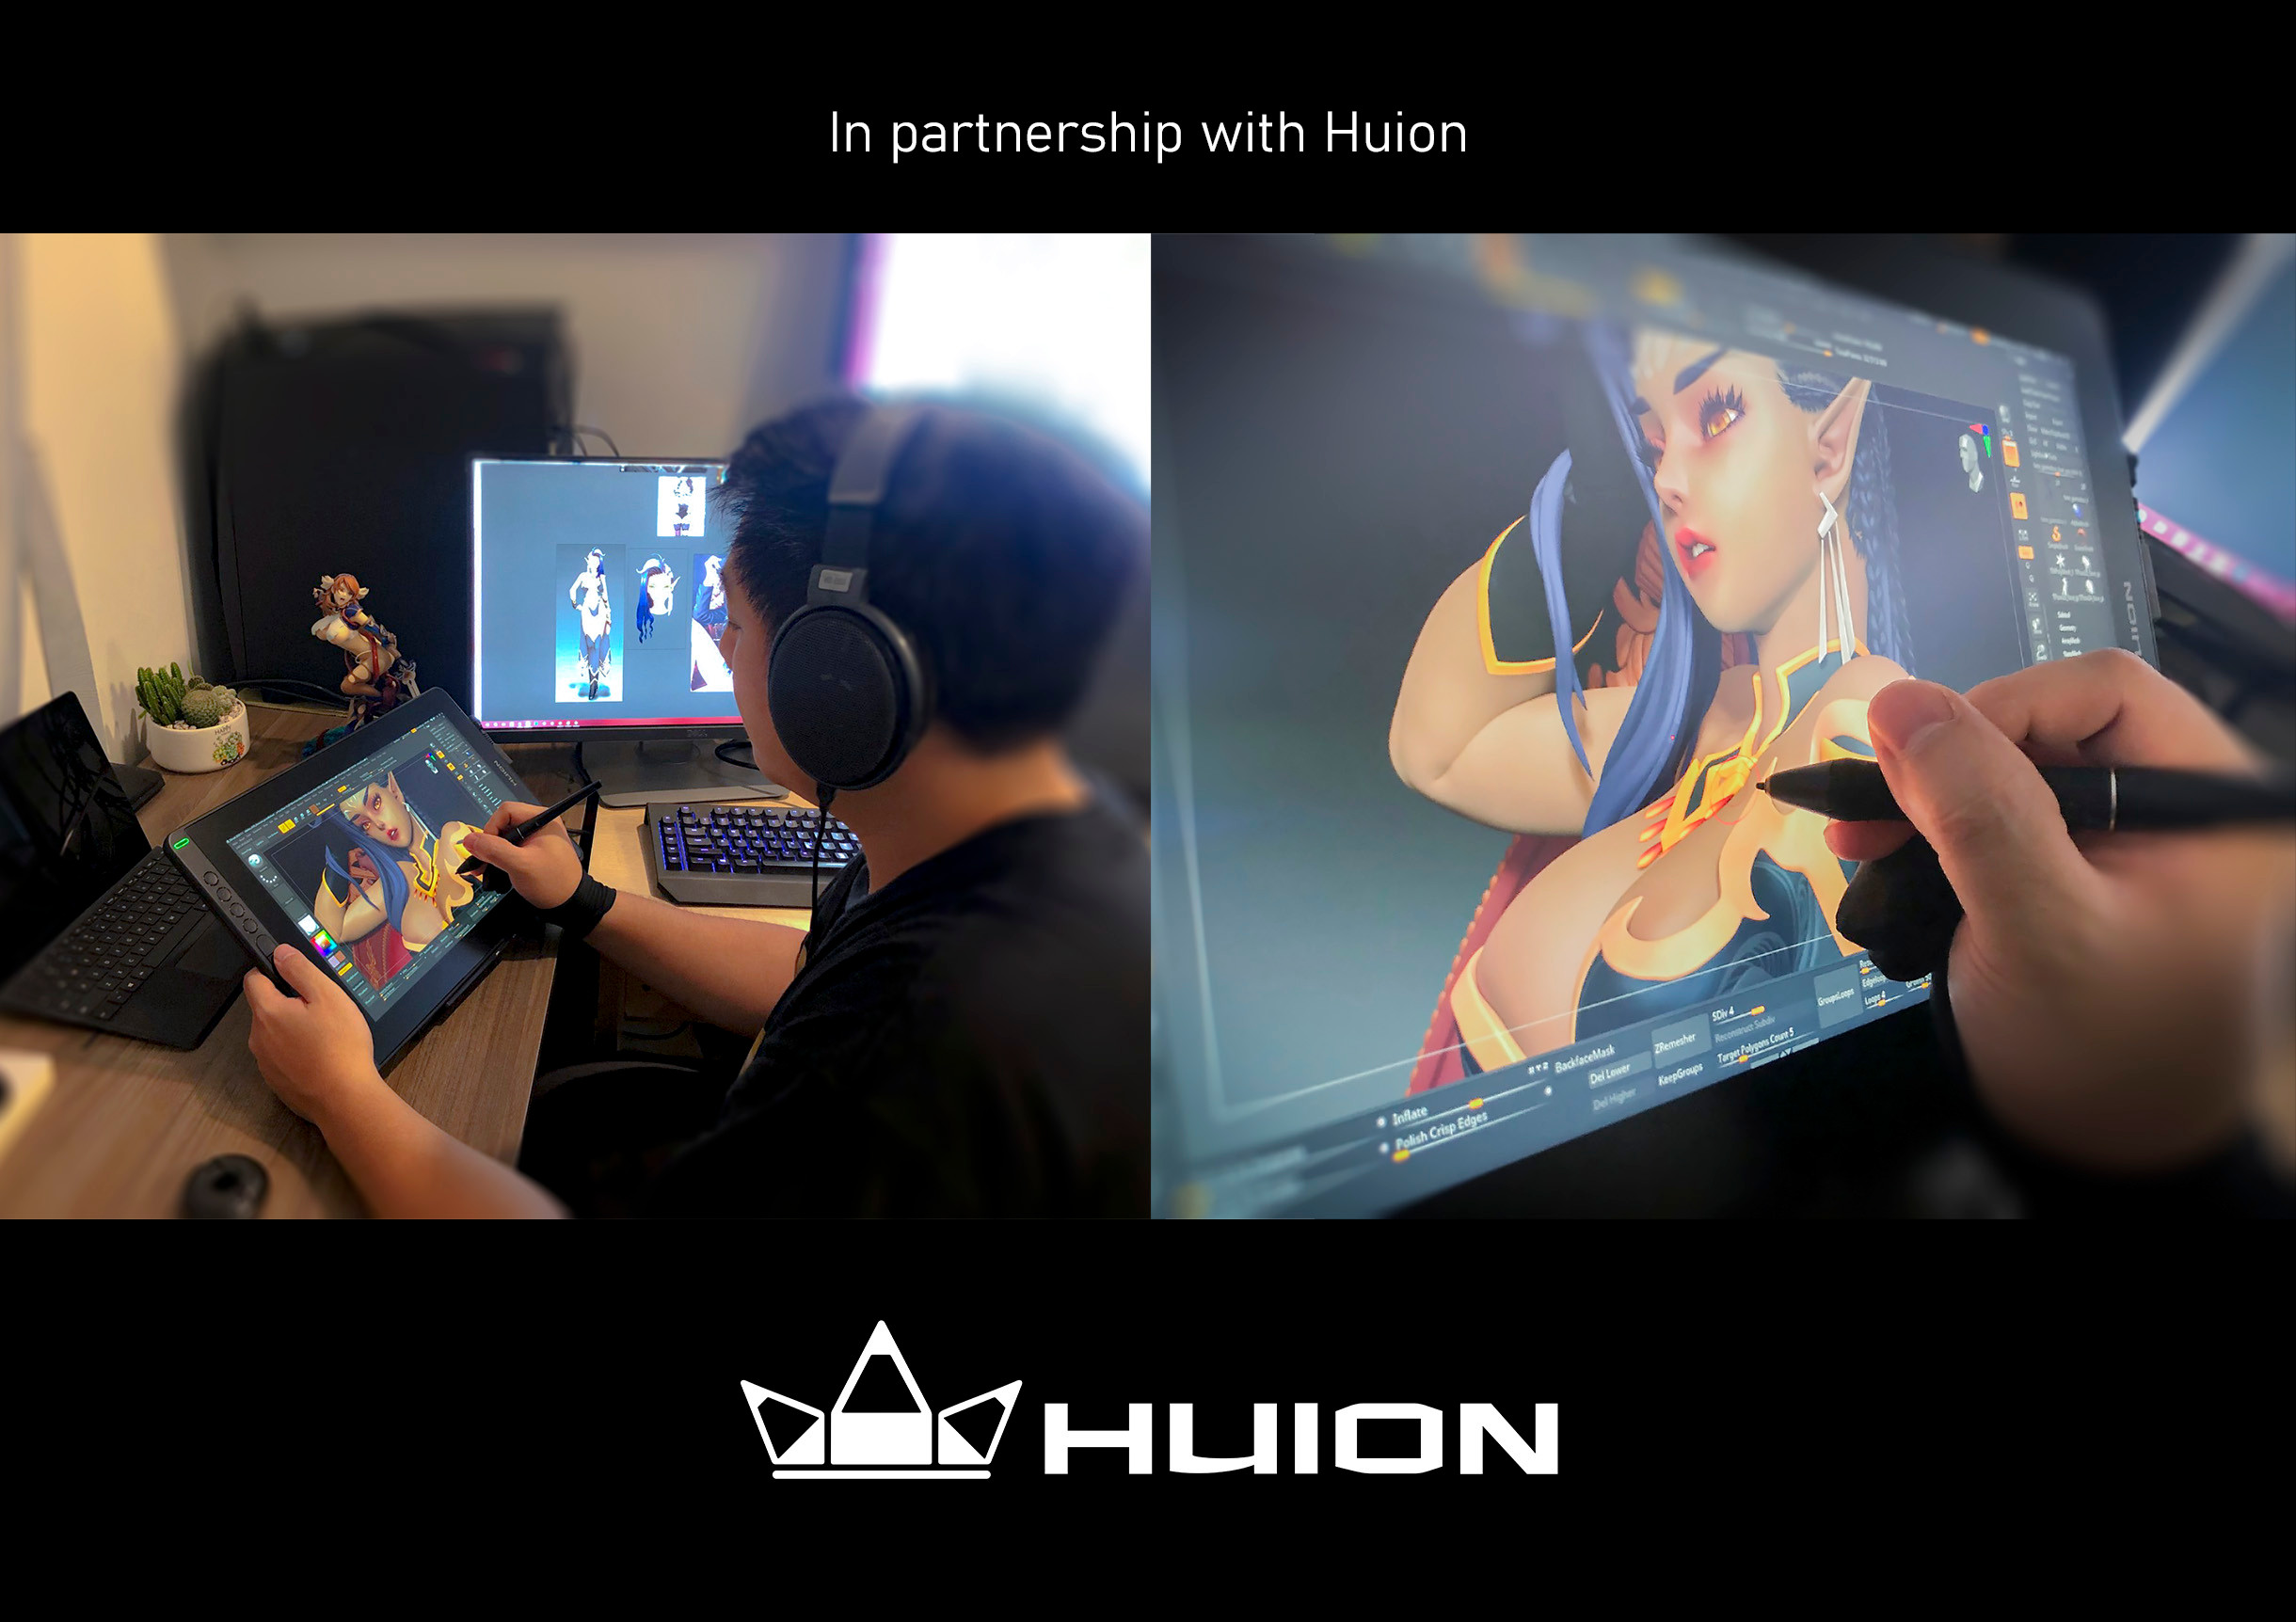 Special thanks to sponsorship of Huion that I have the opportunities to hand-on trying out the kamvas 16 to work on this project. It was a pleasure and unique experience using this one, giving me much more mobile flexibility and comfortable workplace